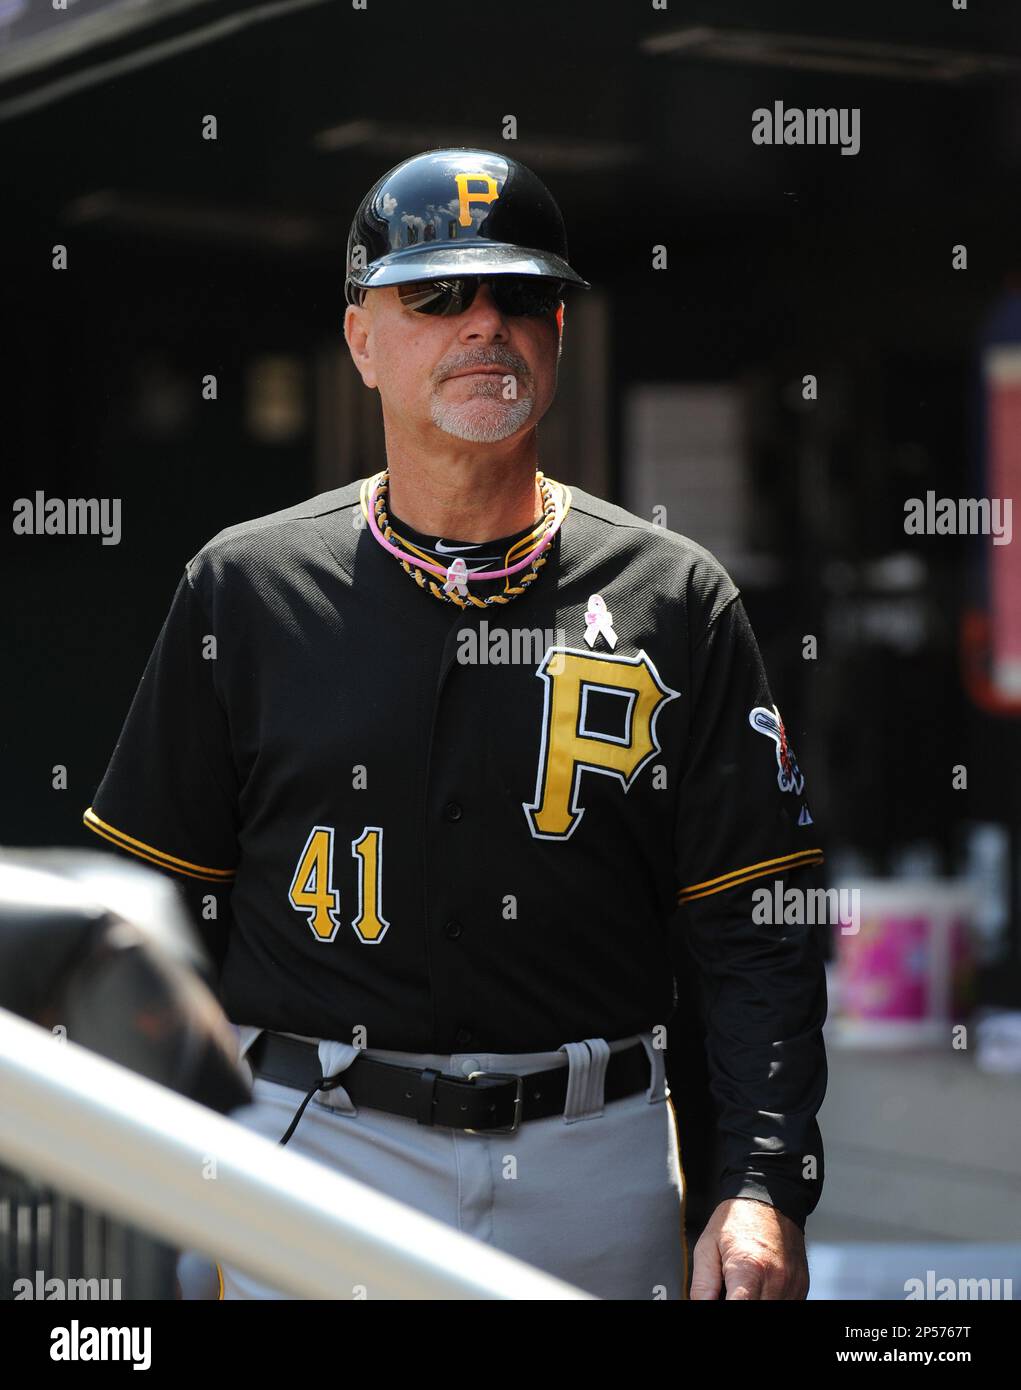 Pittsburgh Pirates coach Rick Sofield (41) during game against the New York  Mets at Citi Field in Queens, New York; May 12, 2013. Pirates defeated Mets  3-2. (AP Photo/Tomasso DeRosa Stock Photo - Alamy